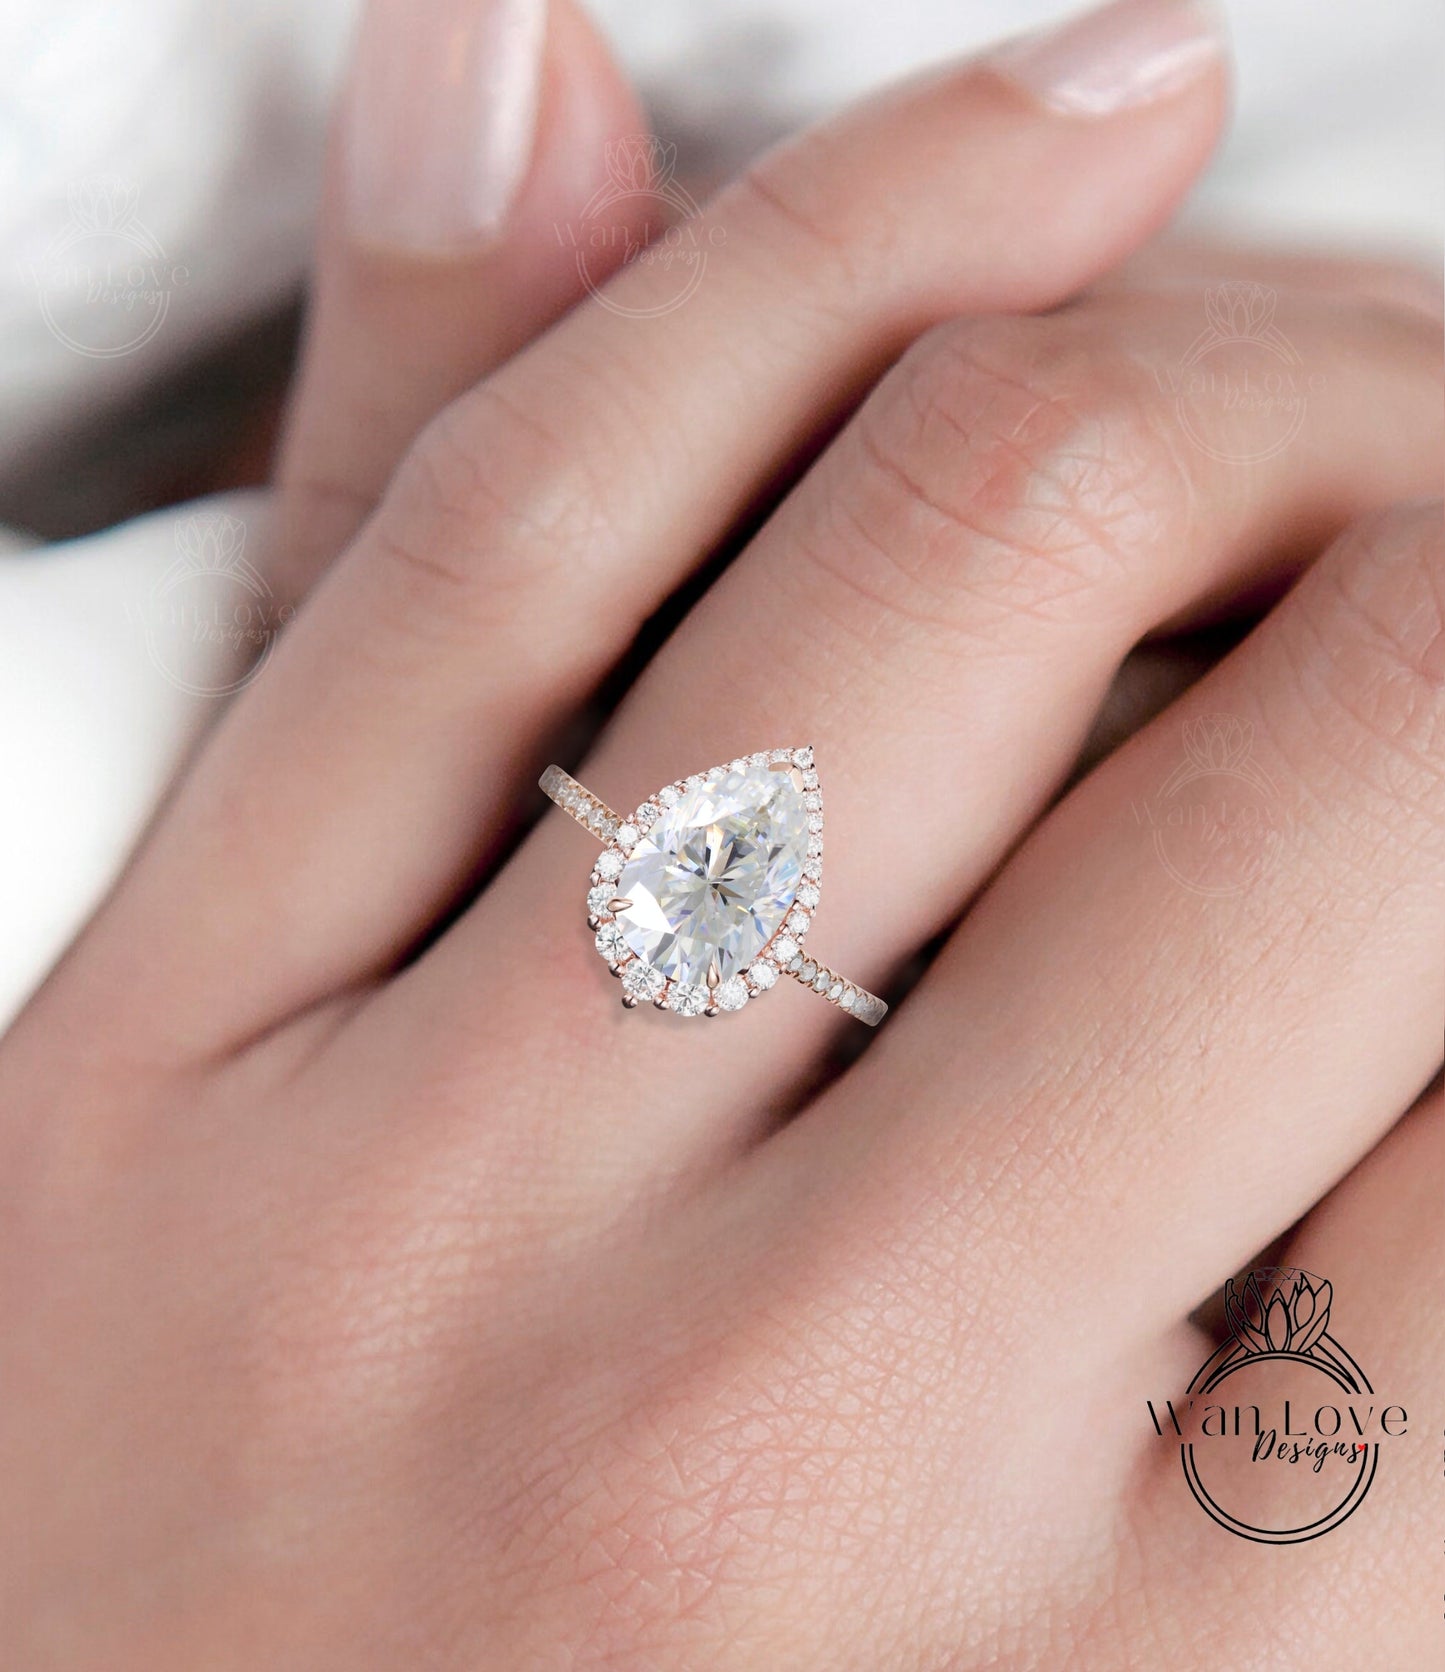 Antique Pear shaped Moissanite engagement ring vintage Art deco Unique ring white gold Diamond halo wedding promise ring Anniversary ring Wan Love Designs